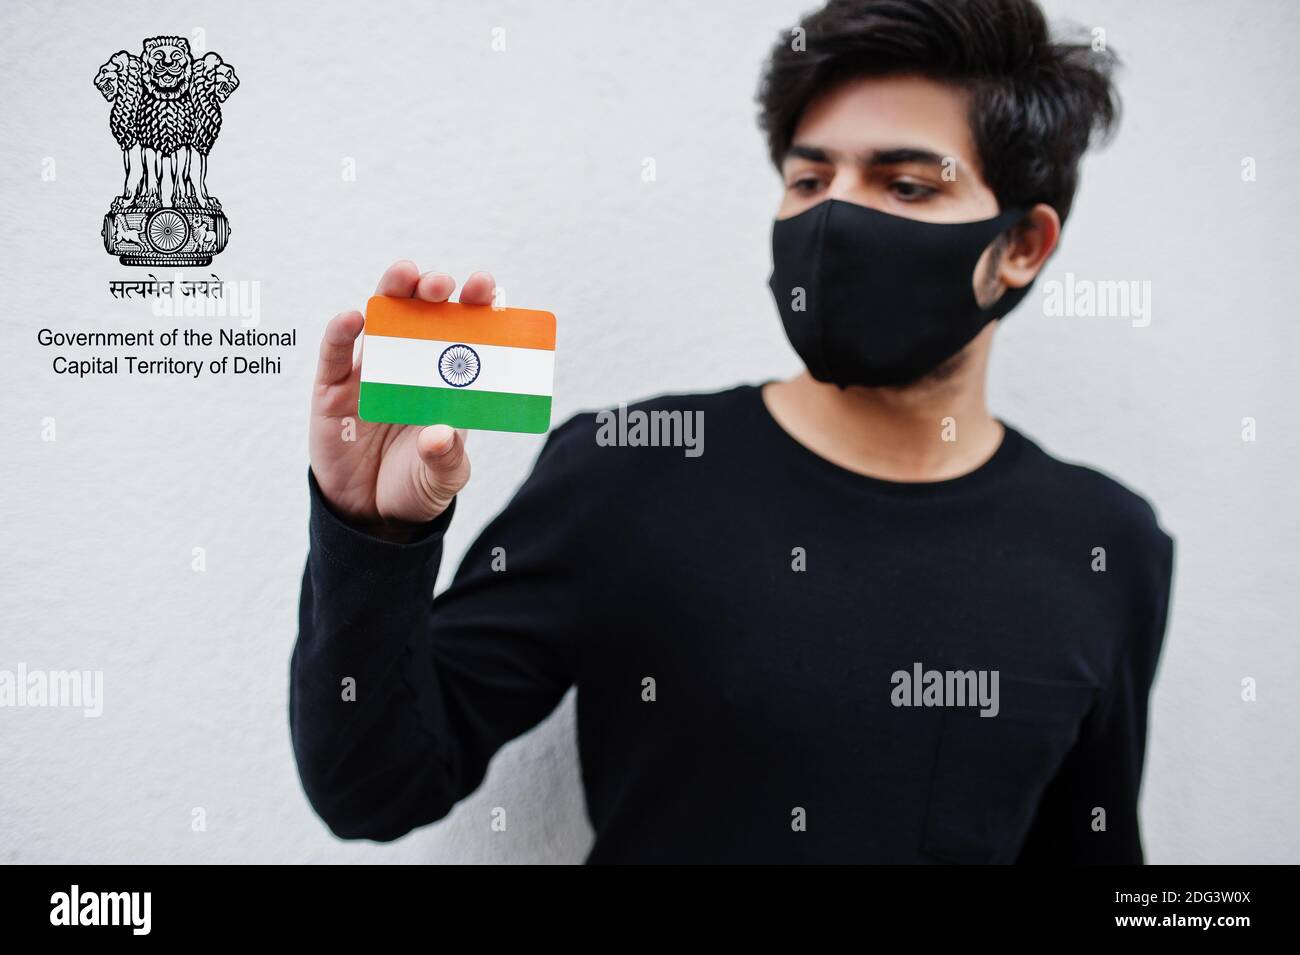 Indian man wear all black and face mask, hold India flag in hand isolated on white background with Delhi union territory emblem . Coronavirus India st Stock Photo